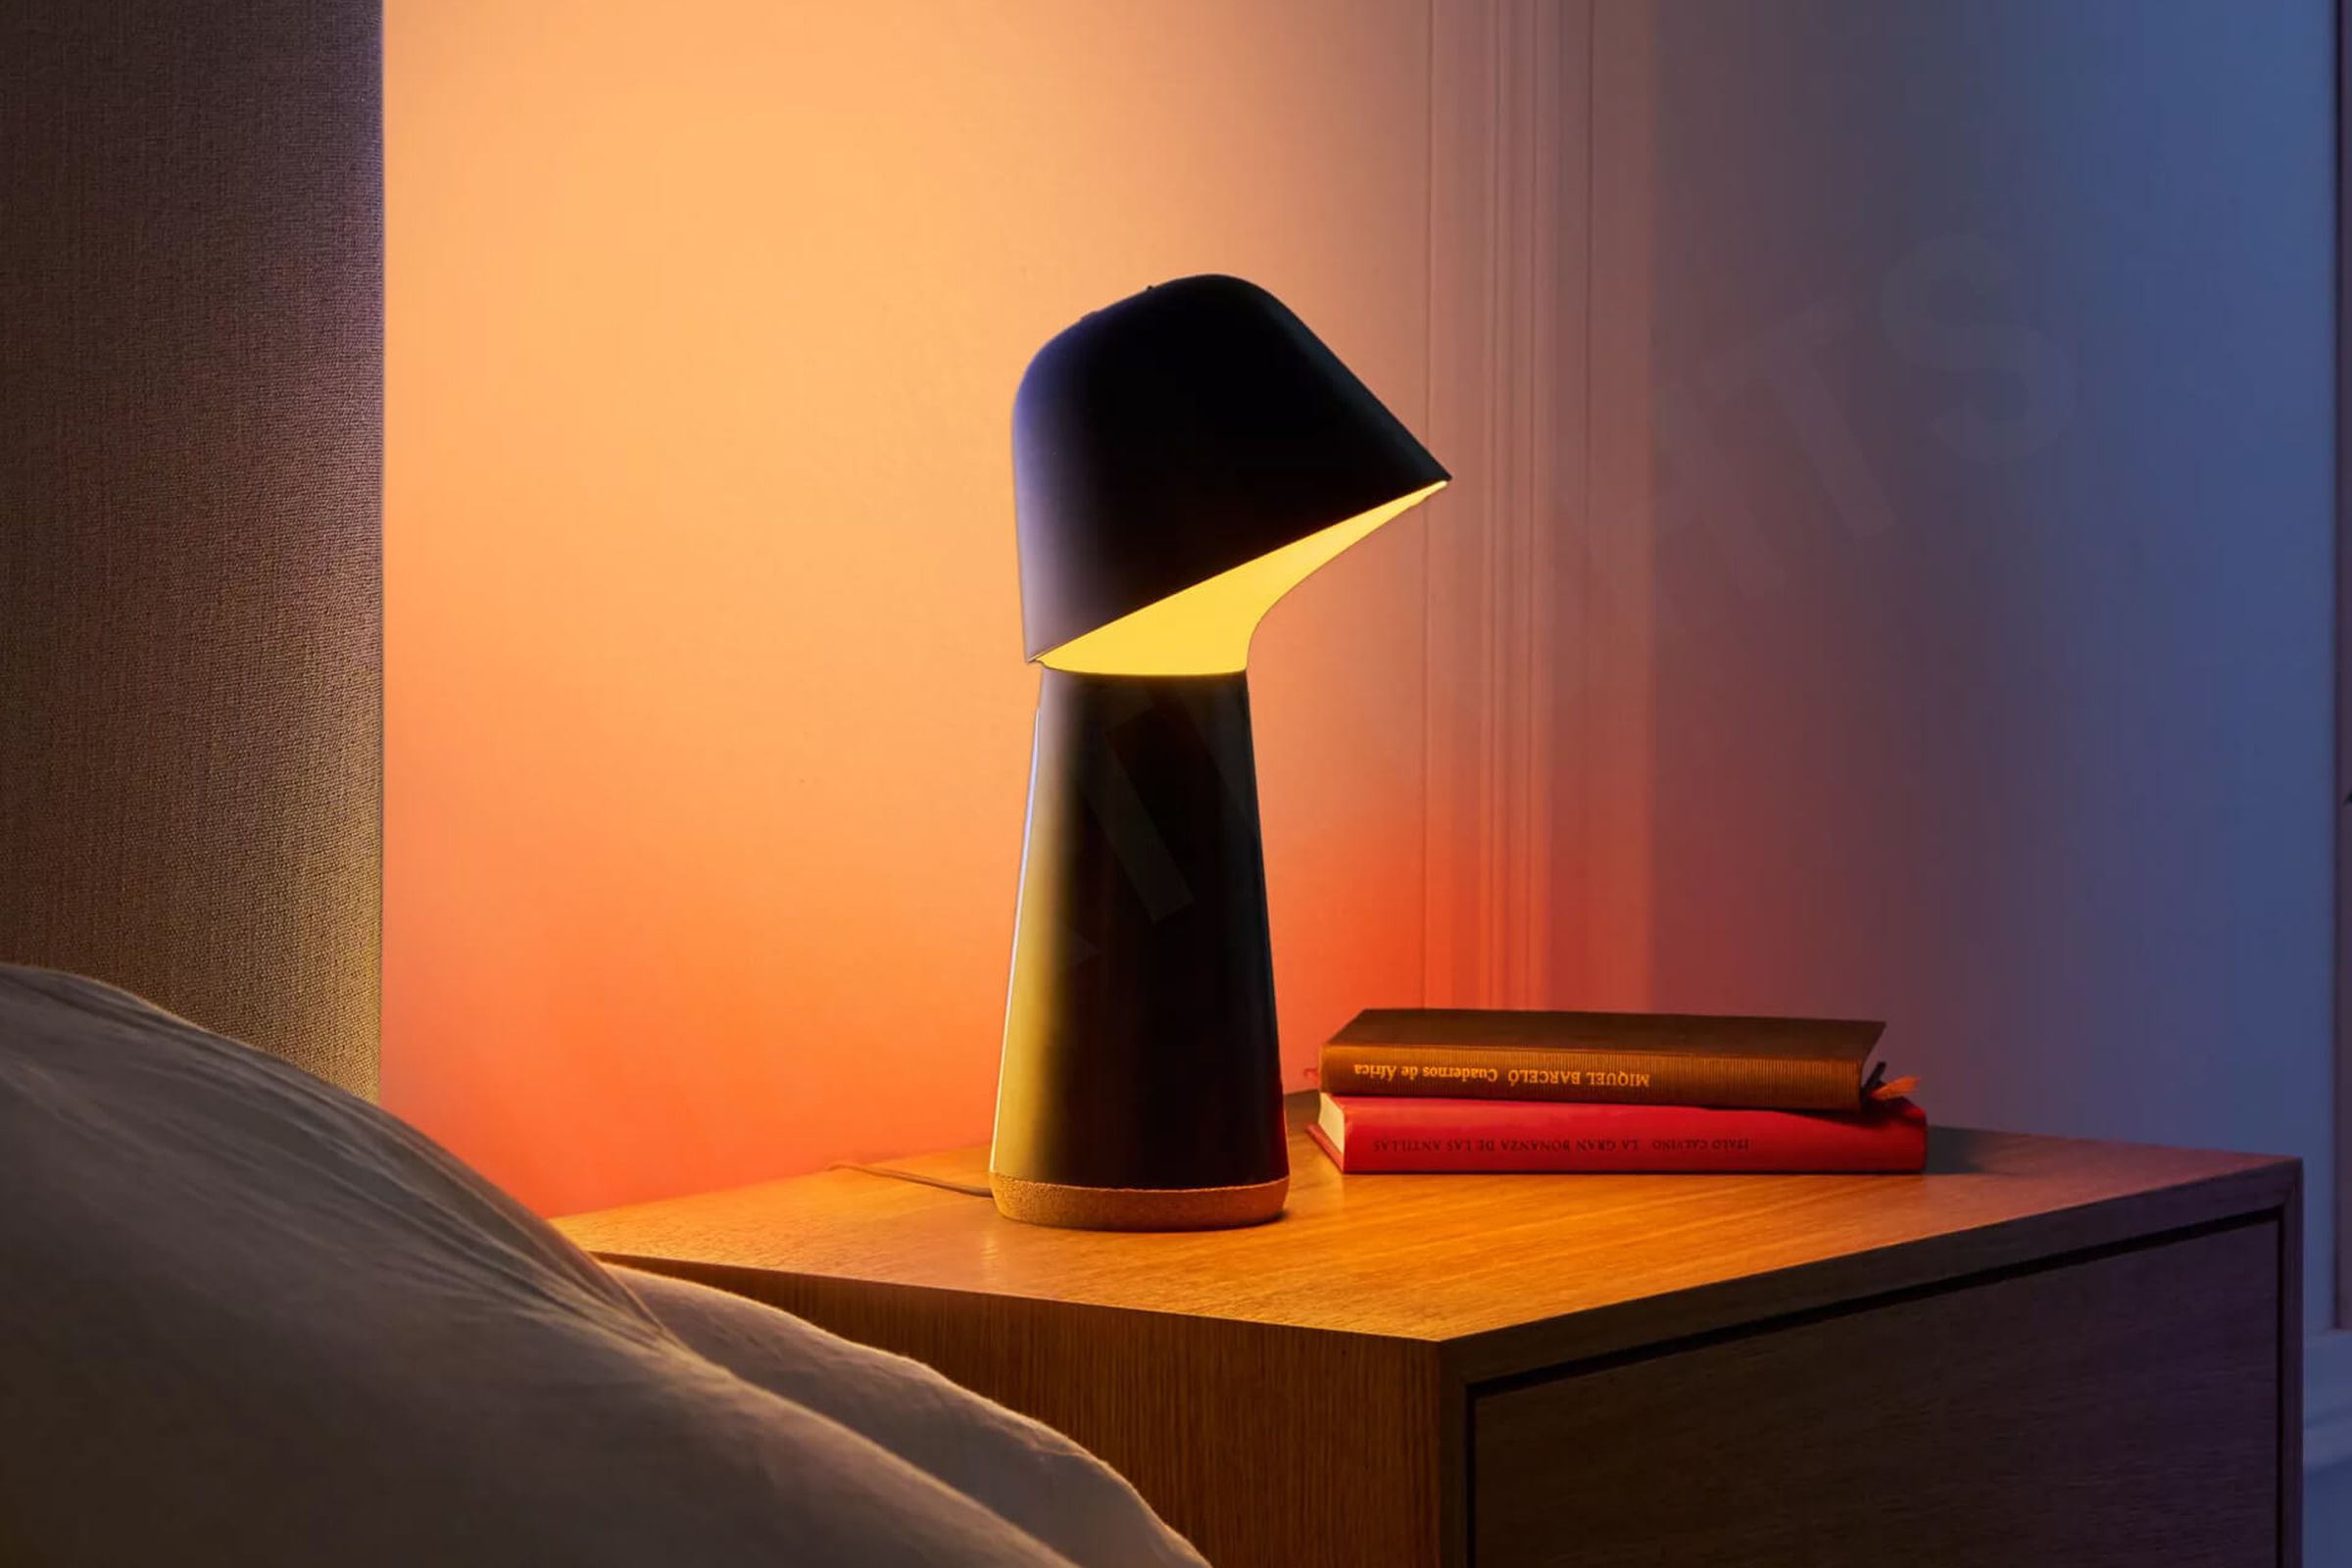 A picture of the Twilight sitting on a bedside table.